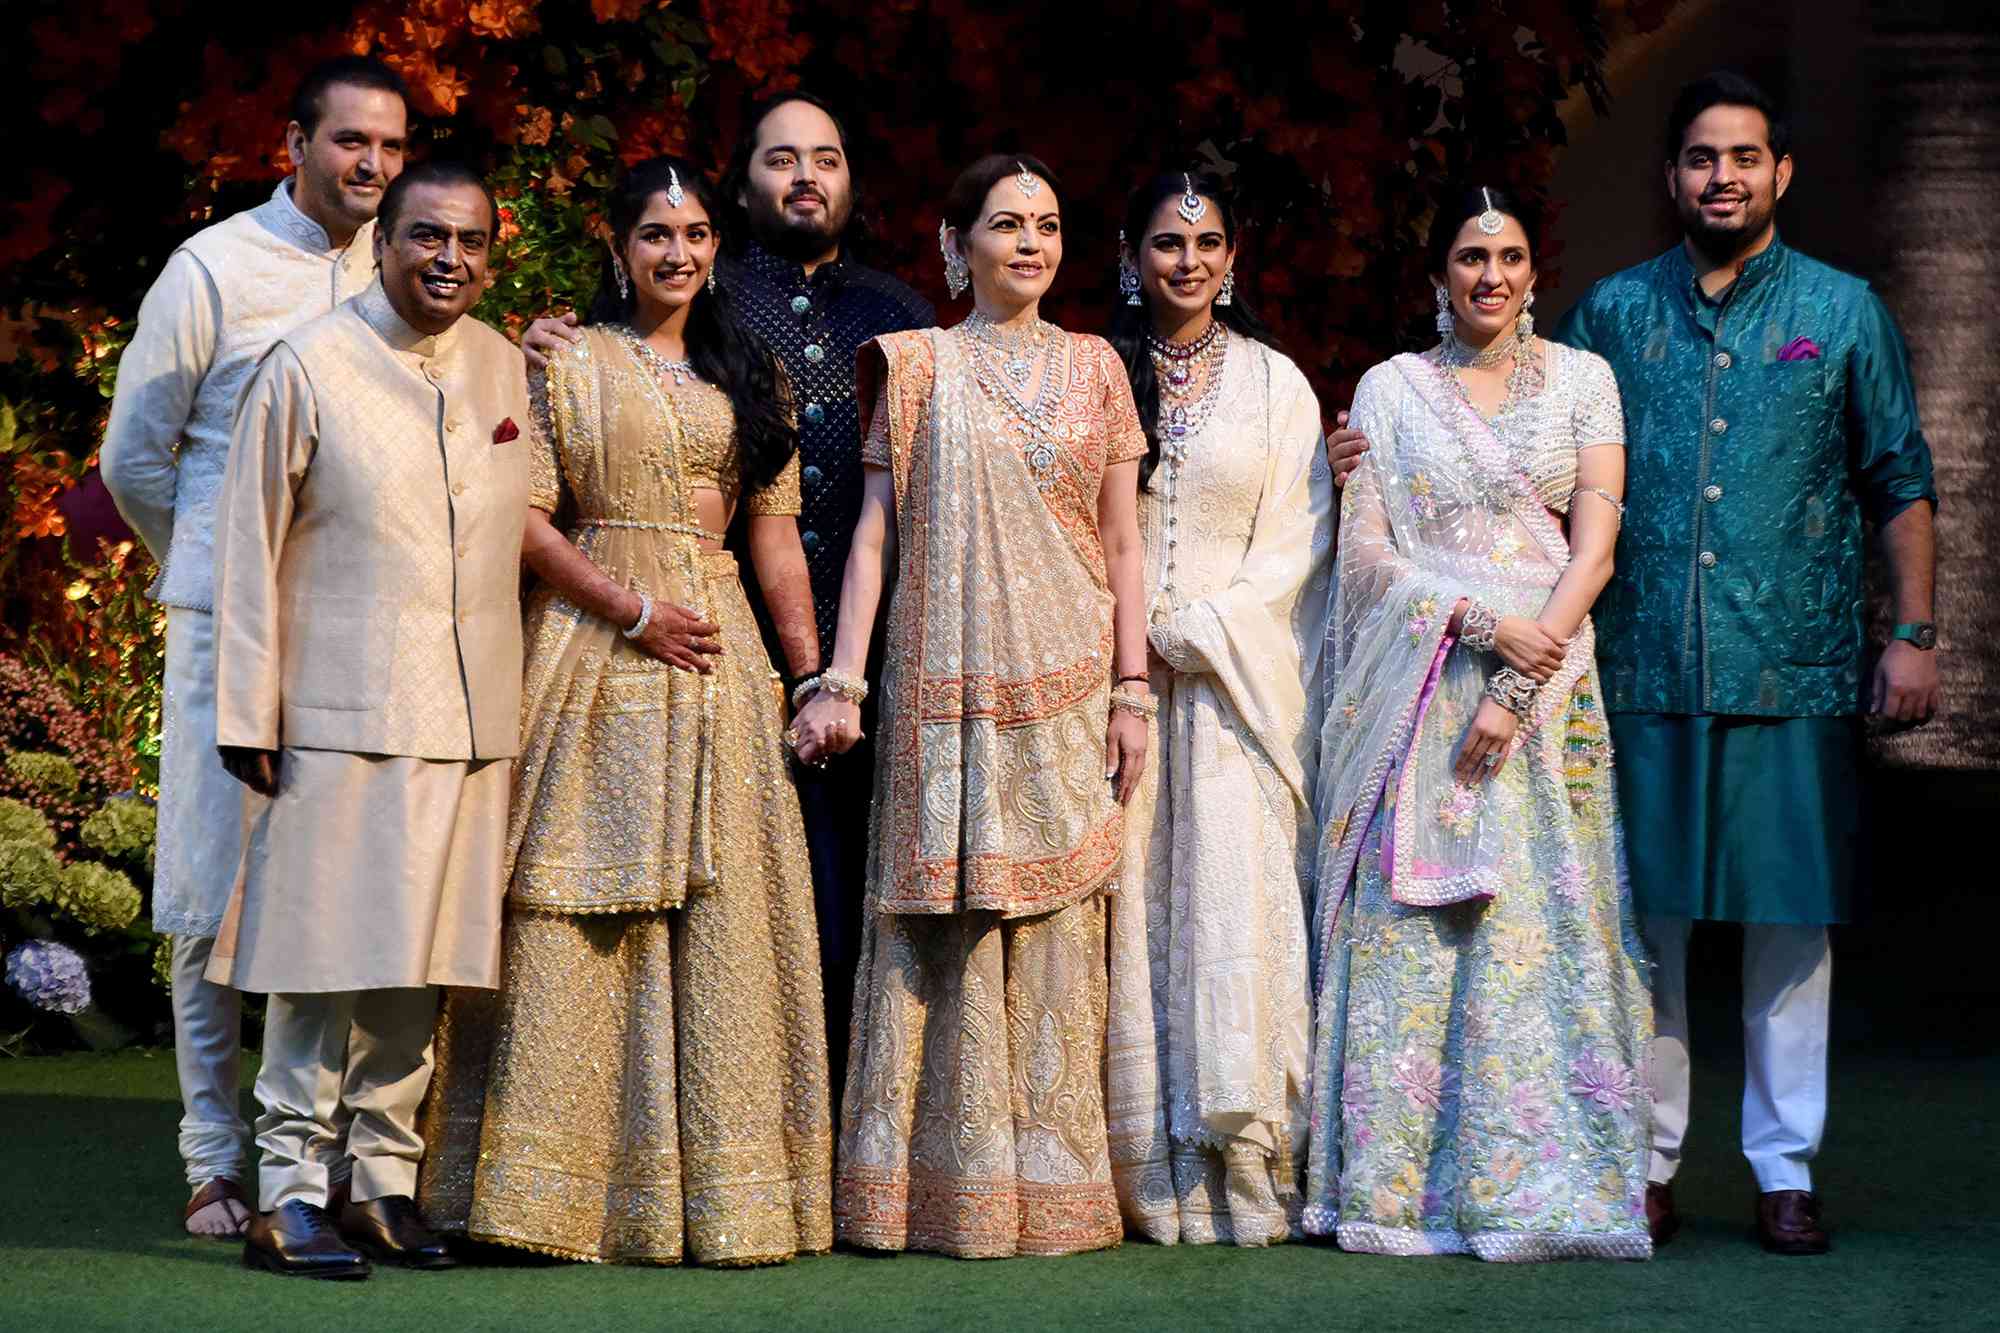 Meet the Billionaire Ambani Family: From Their Business Empire to Their Star-Studded Weddings